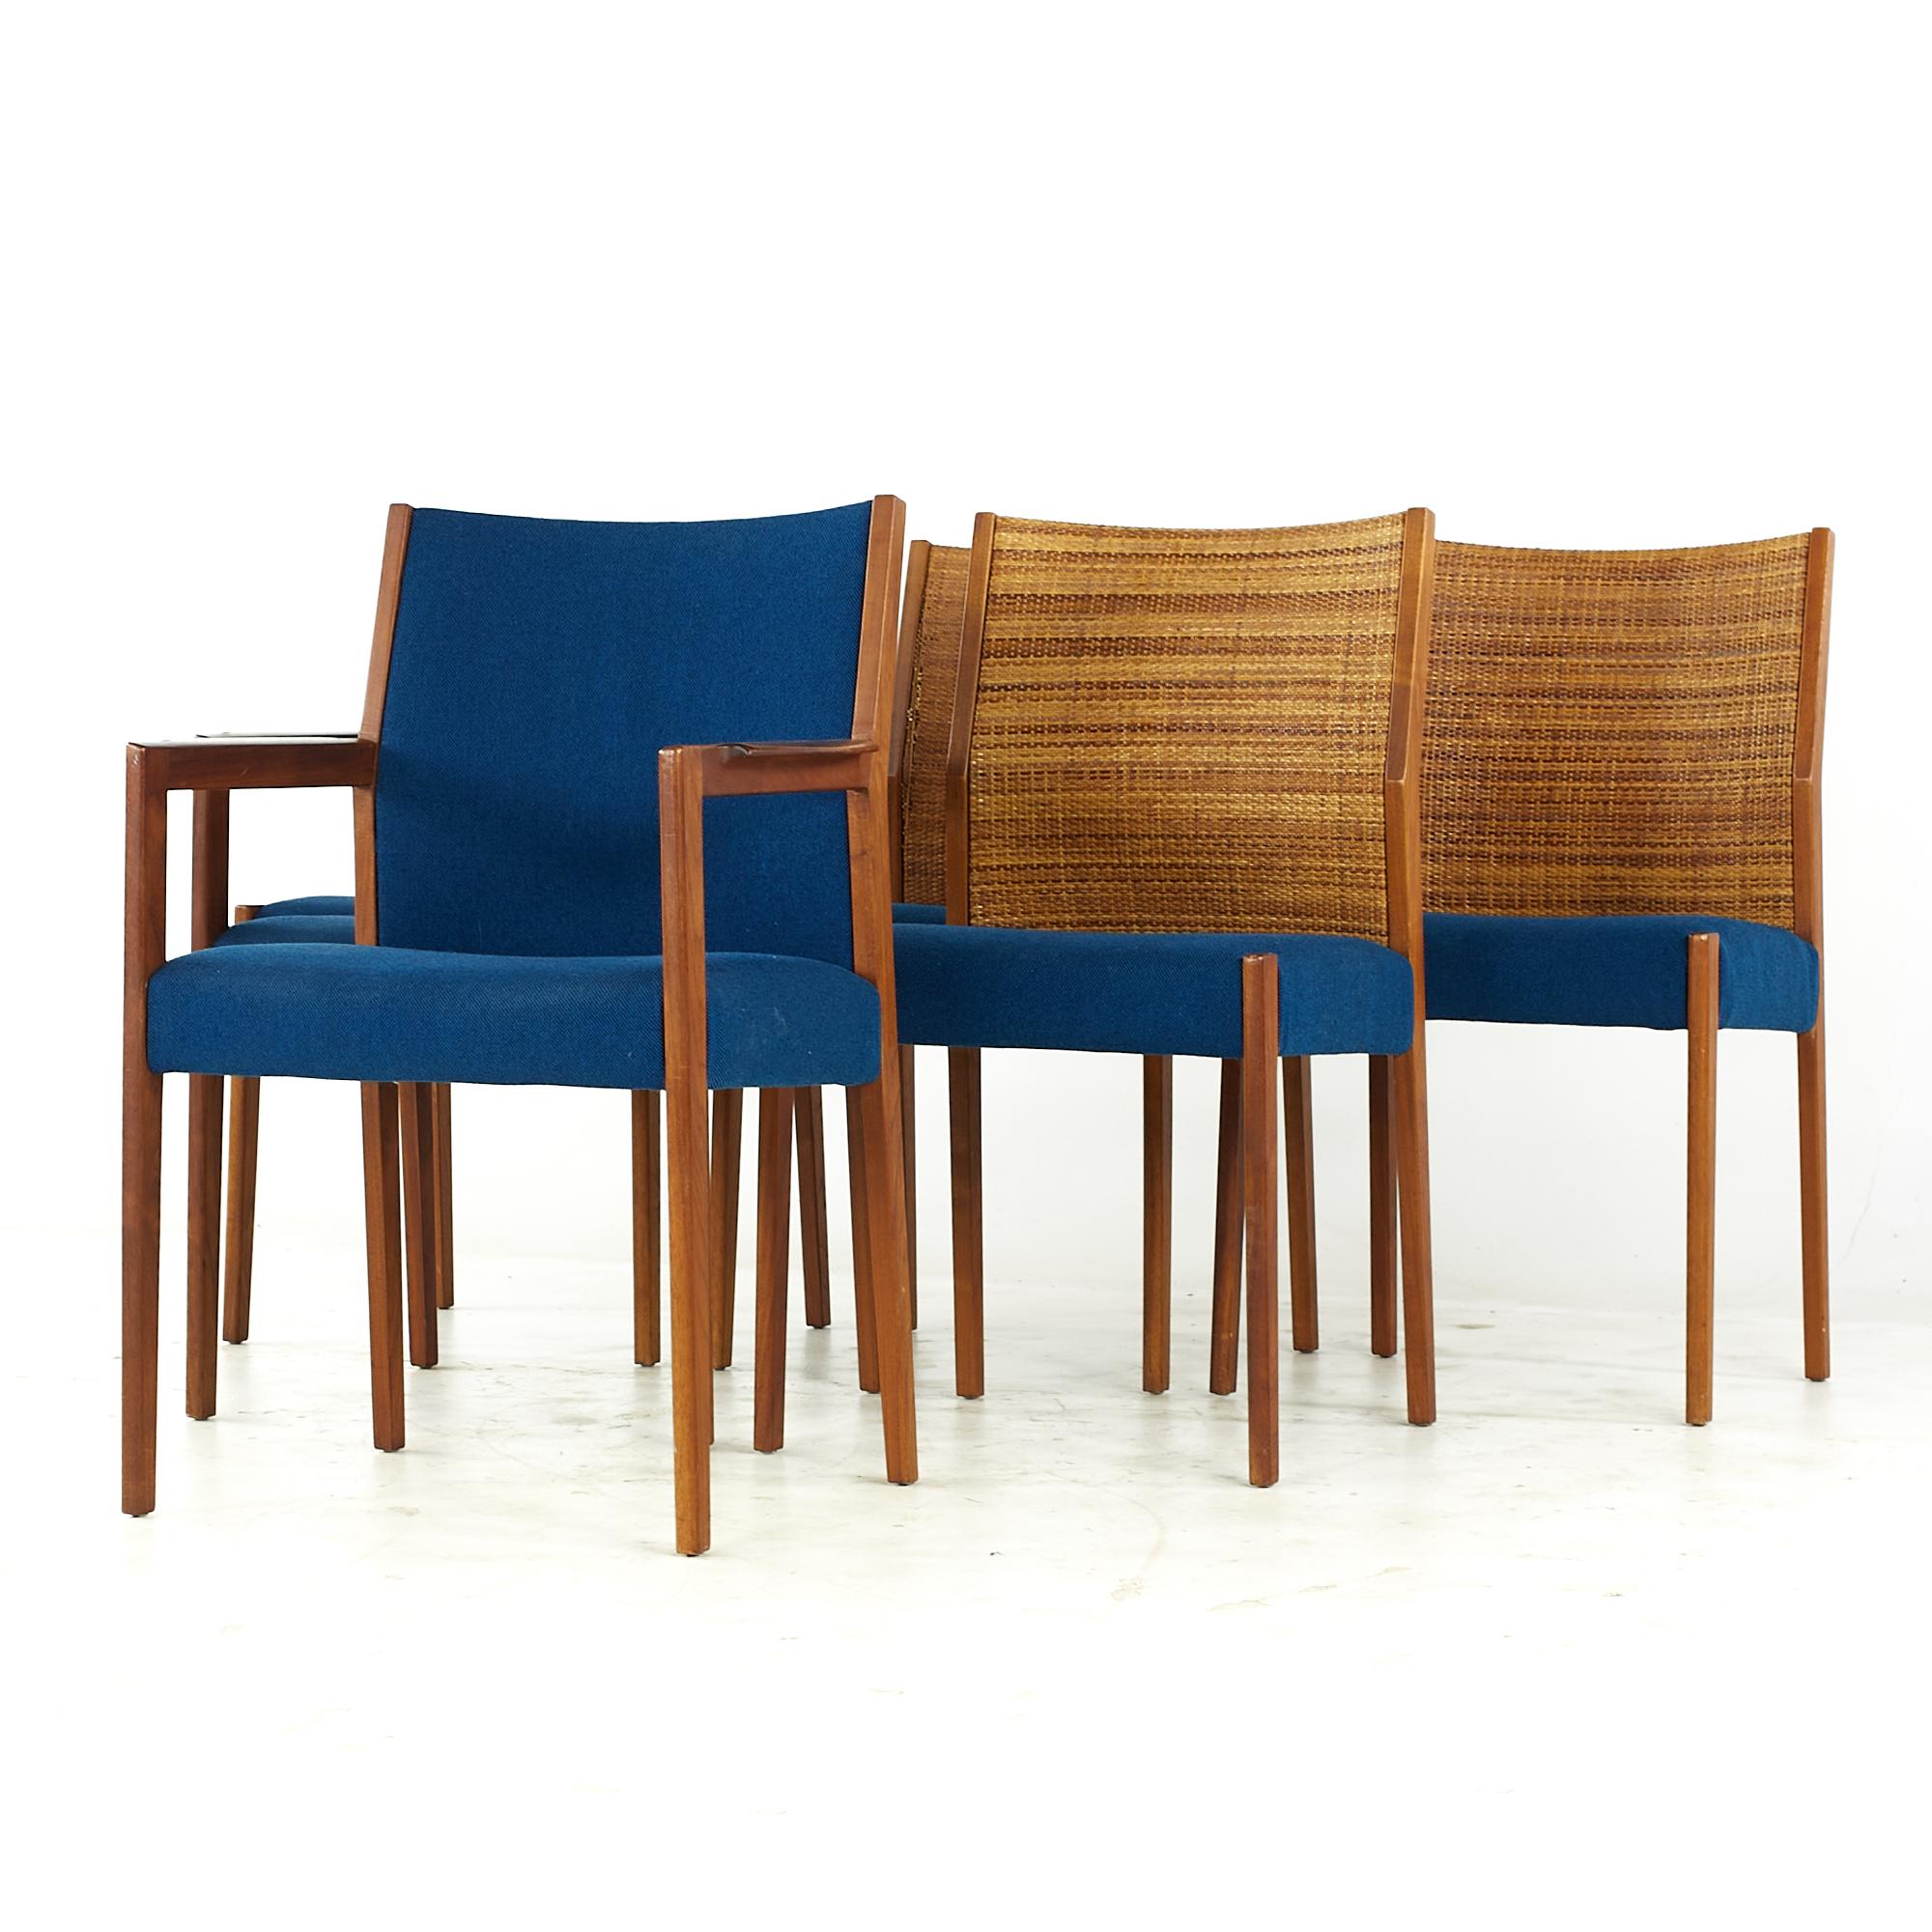 Mid-Century Modern Jens Risom Midcentury Cane and Walnut Dining Chairs, Set of 6 For Sale